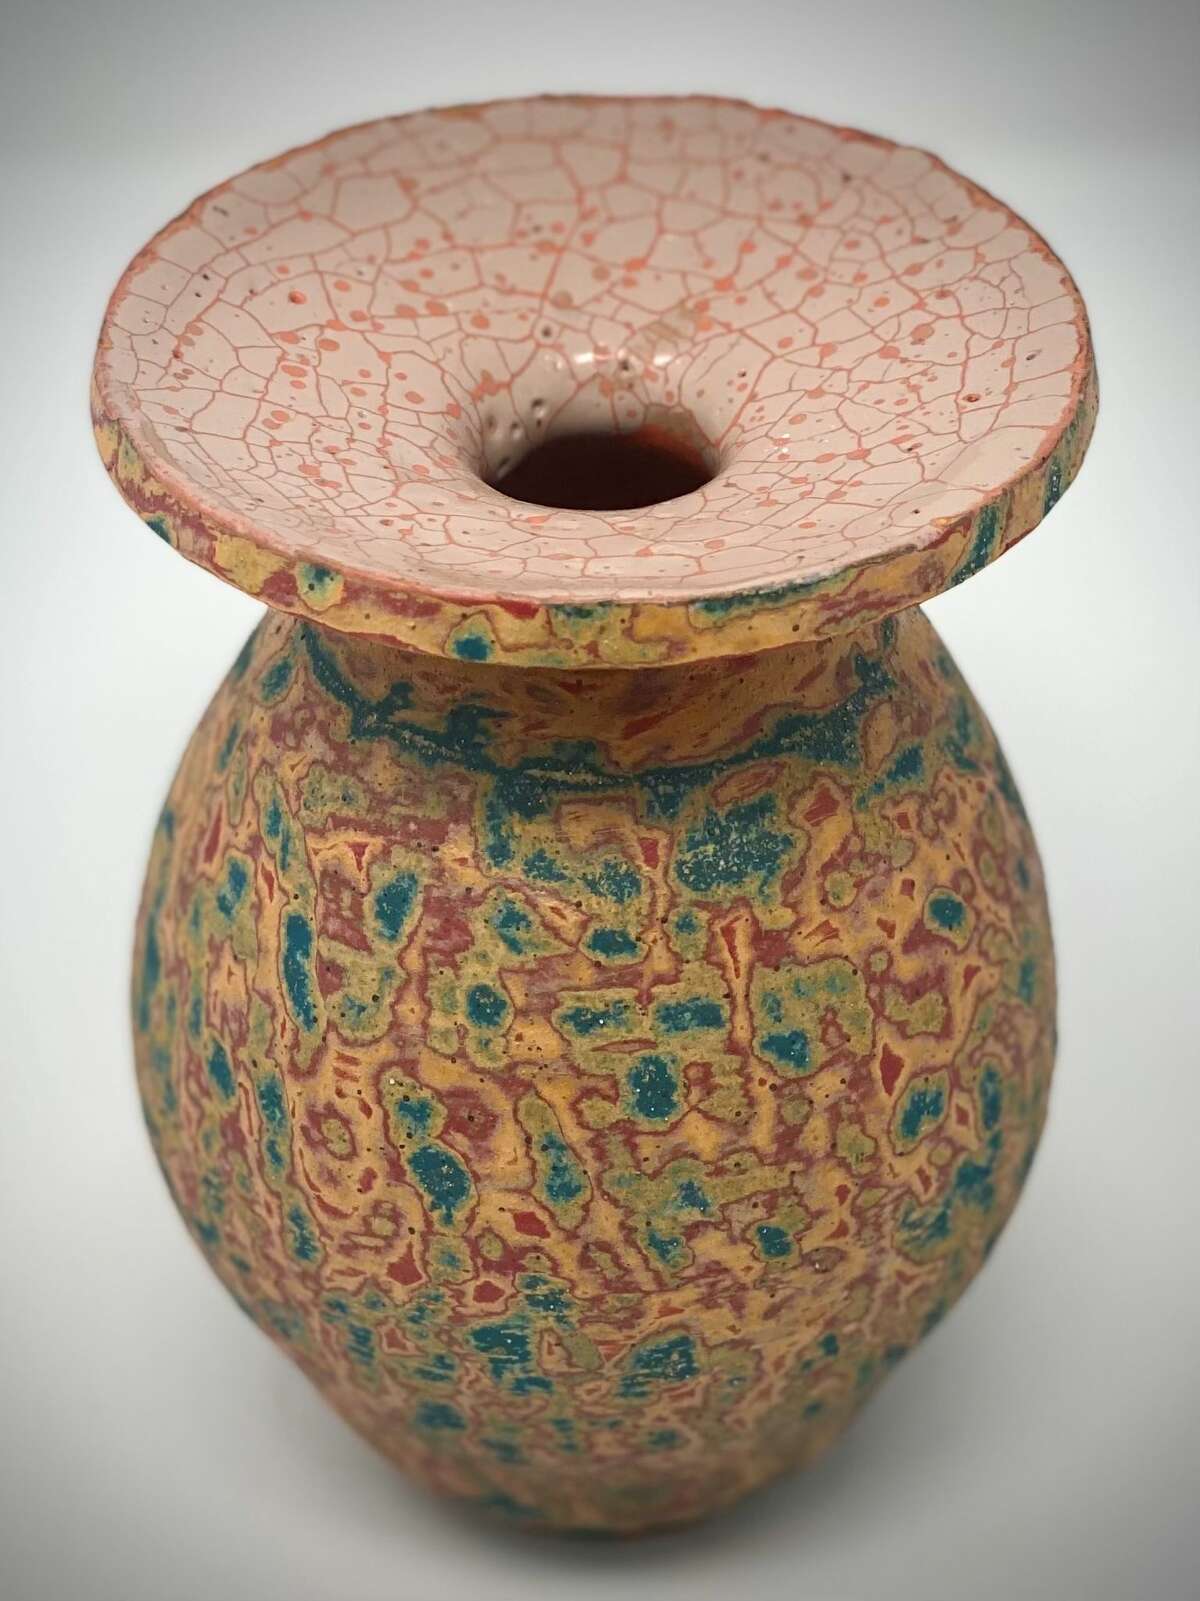 Comedic actor Seth Rogen created a vase that is currently up for auction in the Avon Theatre and Film Center's 2021 auction. The vase also has his first name signed on the bottom. 